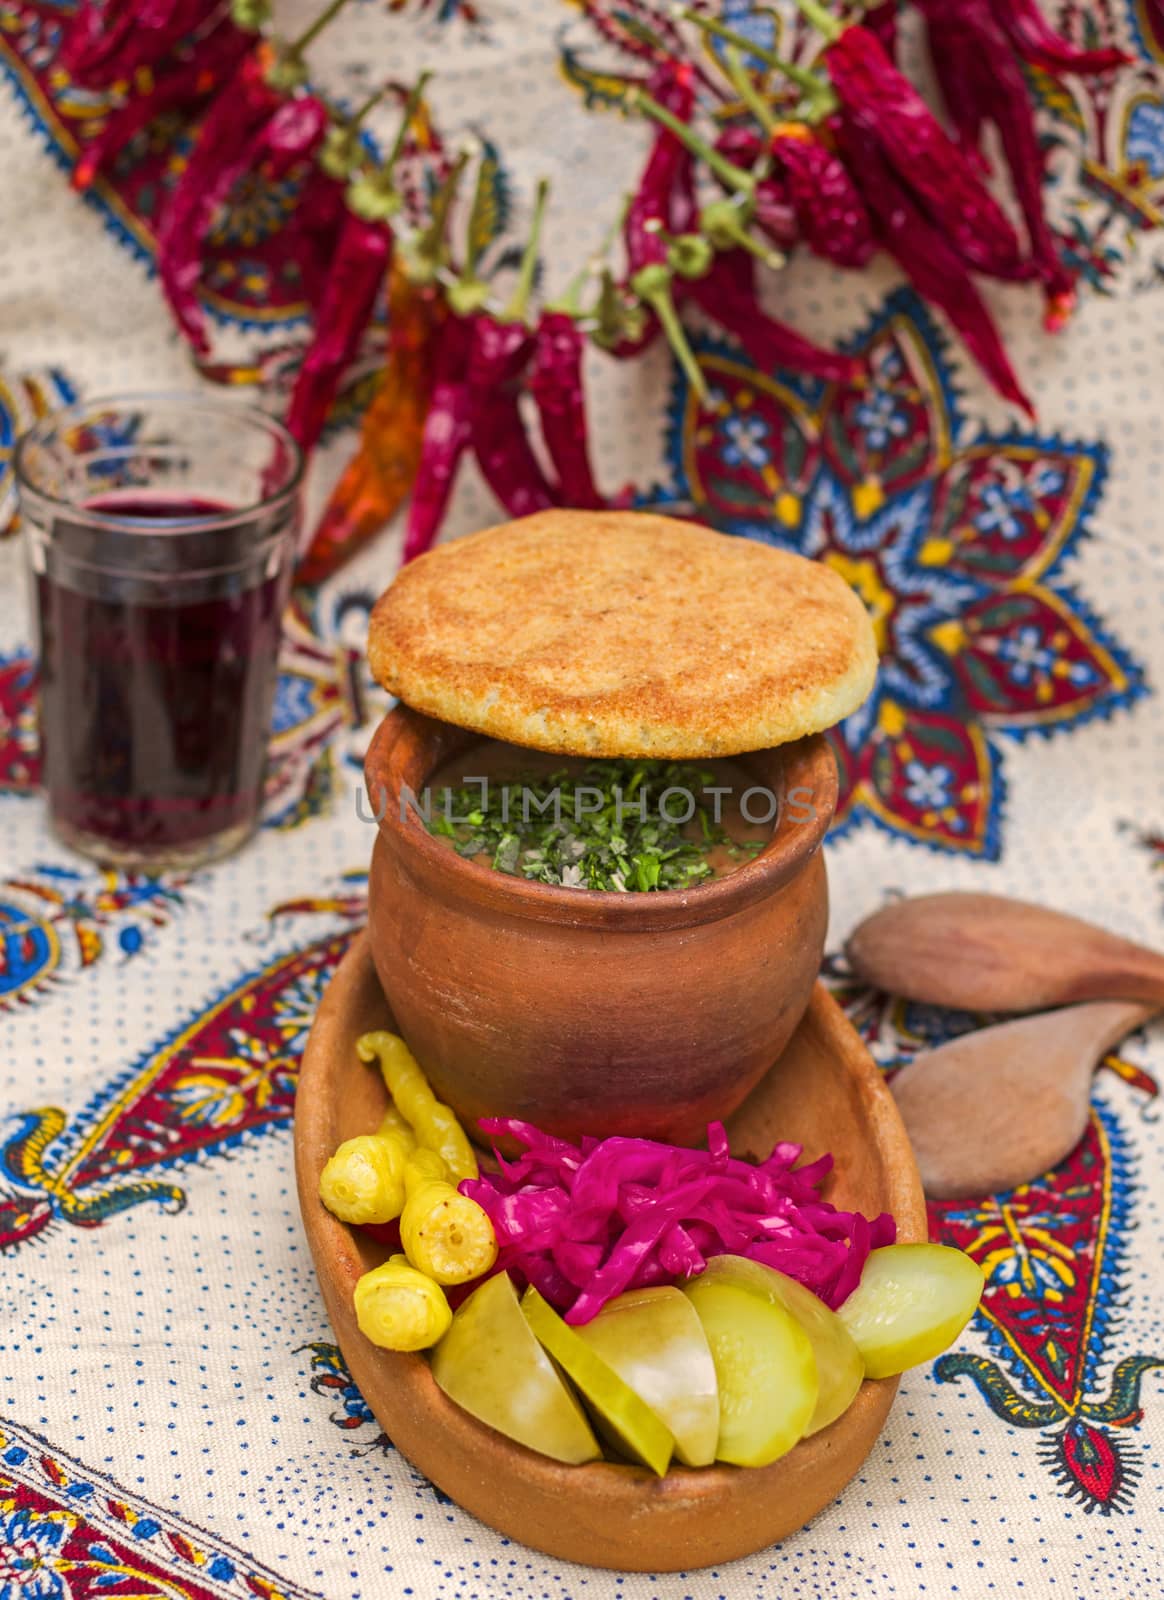 Georgian traditional food Lobio or kidney and haricot beans soup with picked vegetables and red wine. by Taidundua